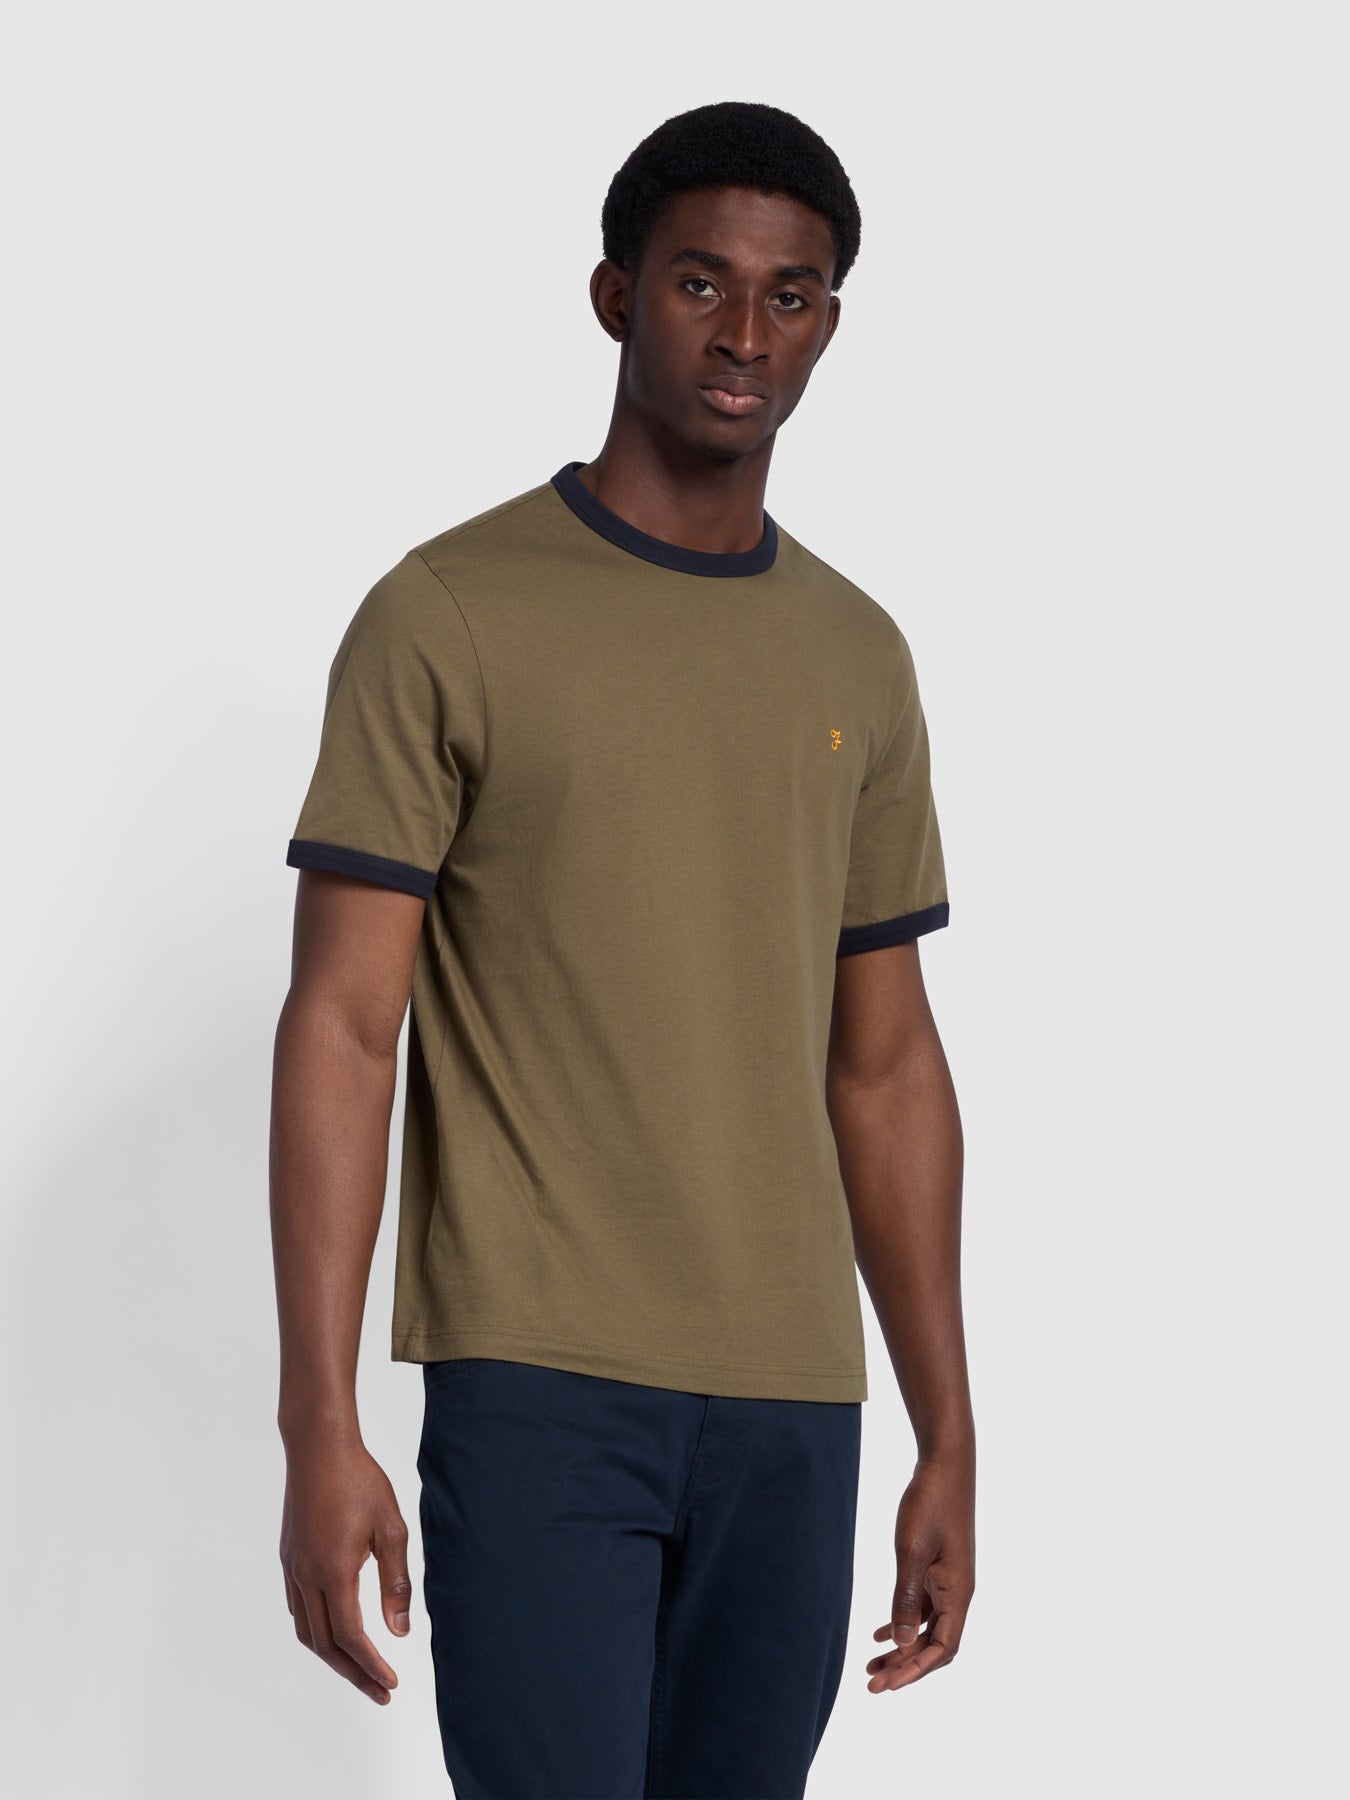 View Groves Regular TShirt In Olive Green information